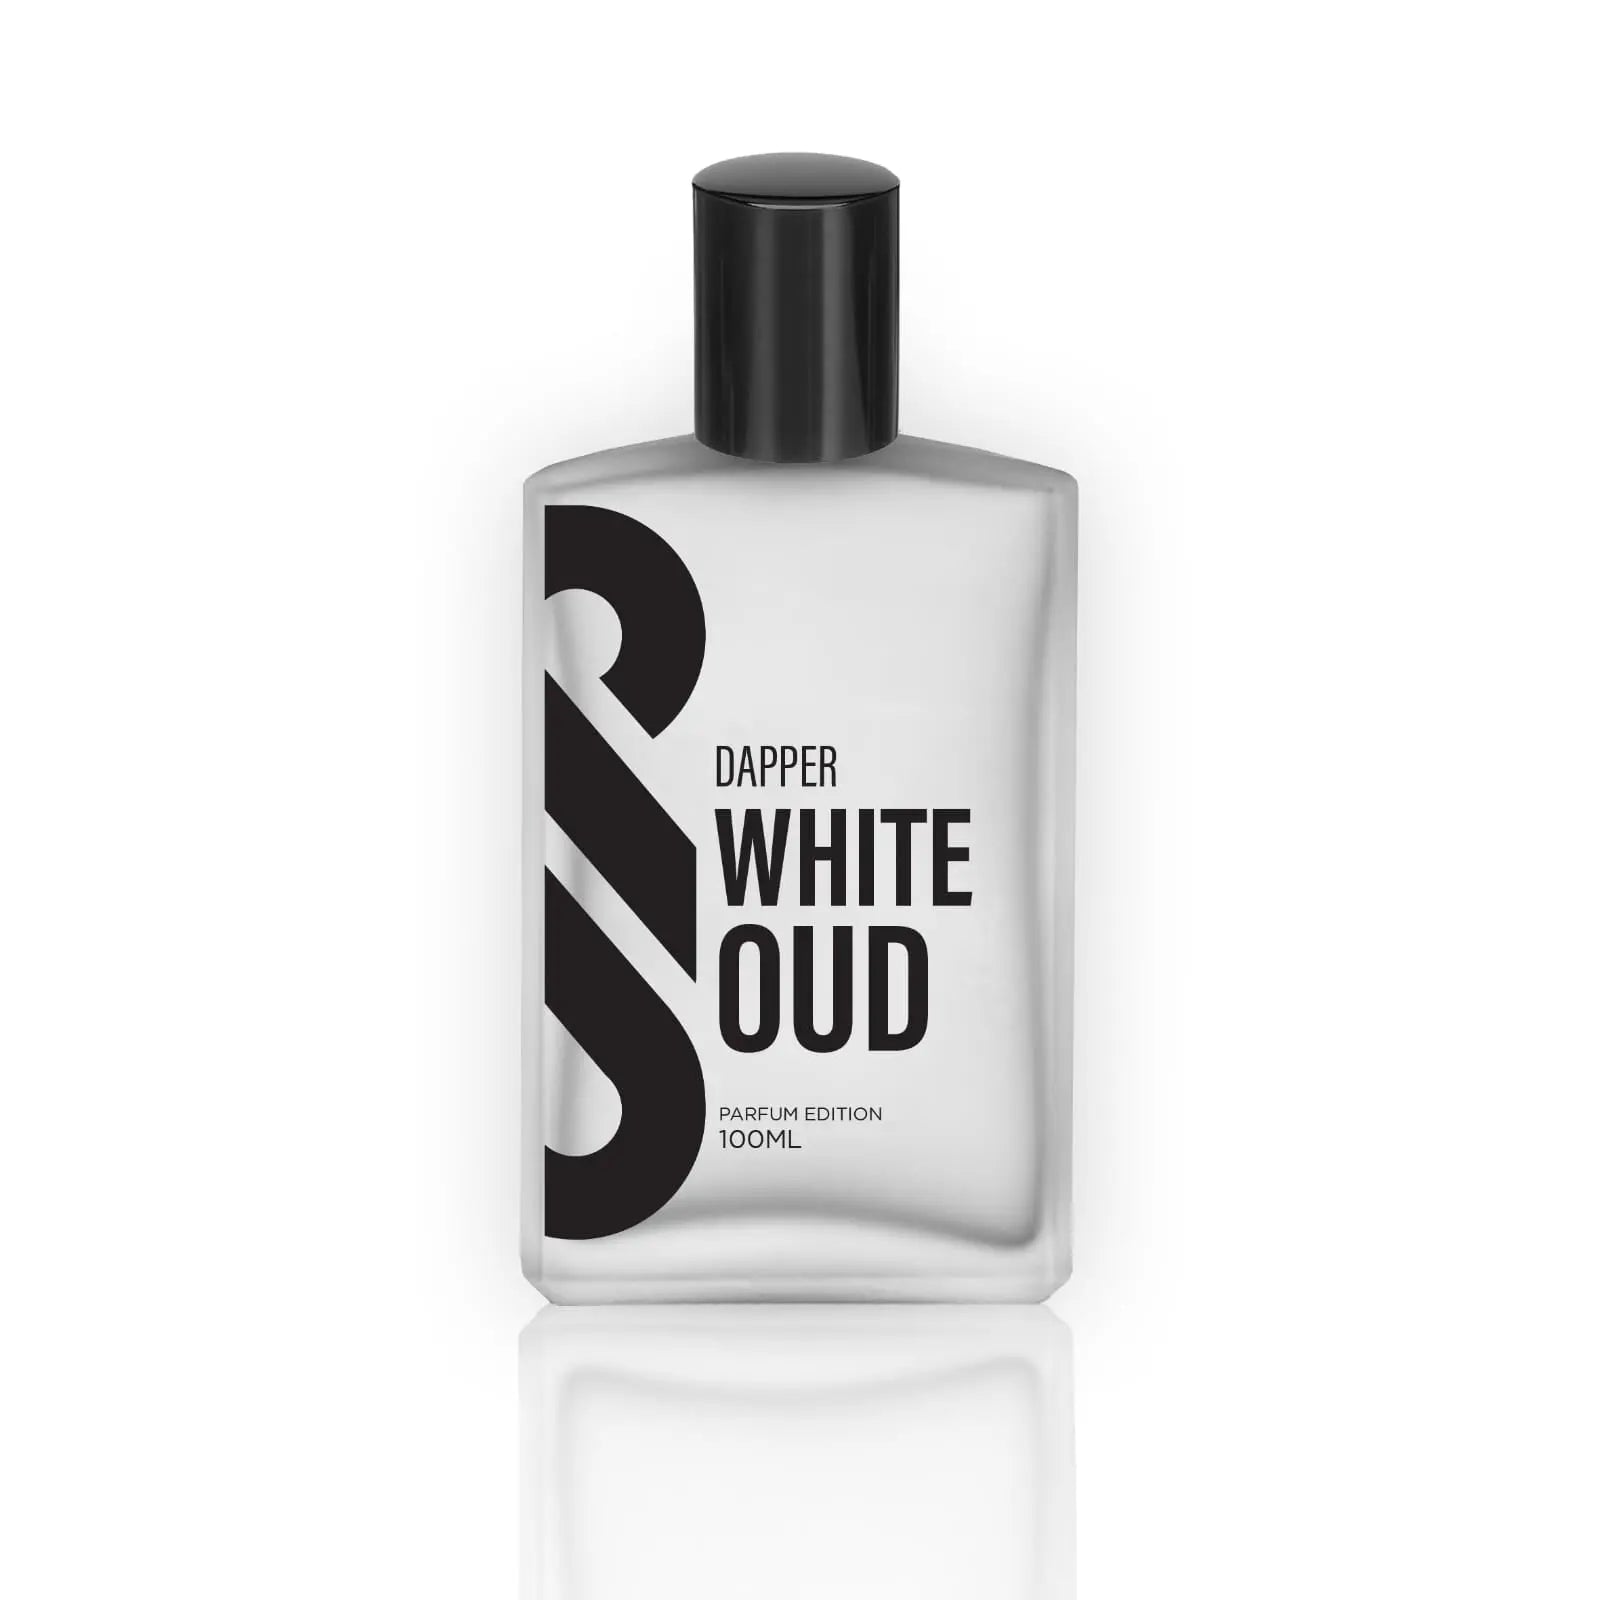 The strongest white oud. Parfum Edition 